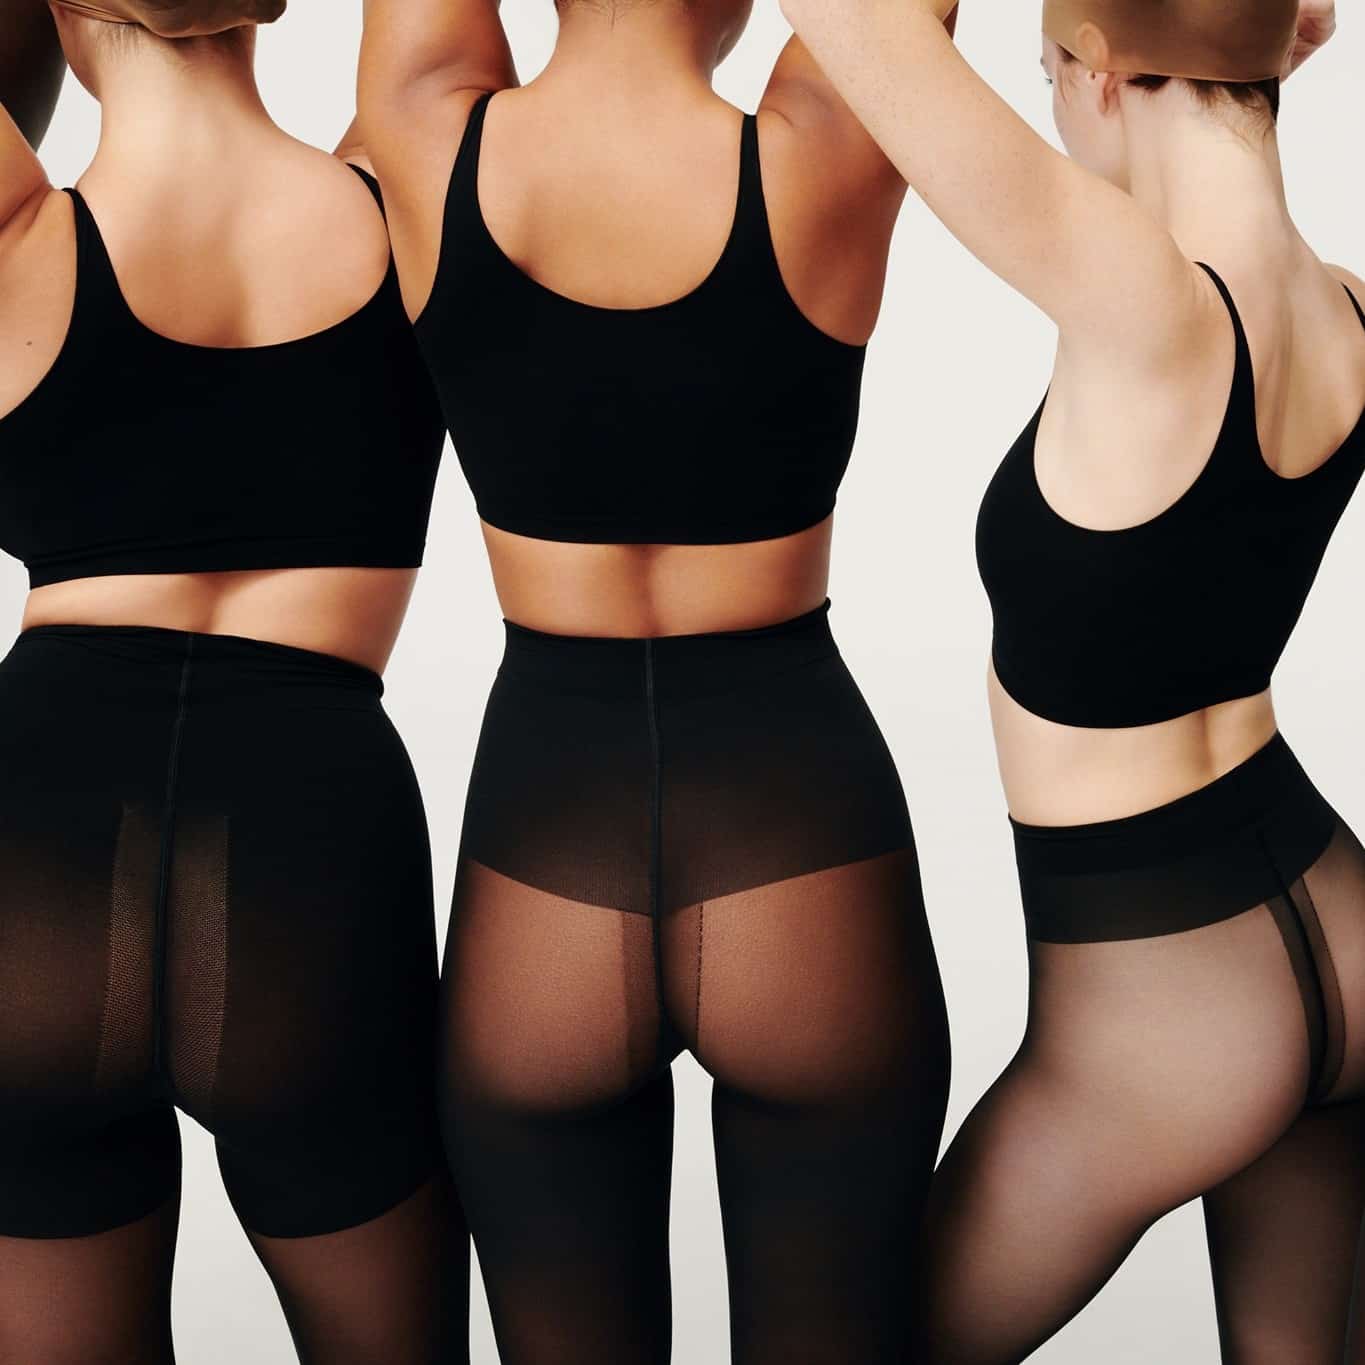 I was nervous at first but we got there. @skims shapewear review #curv, Skims Shapewear